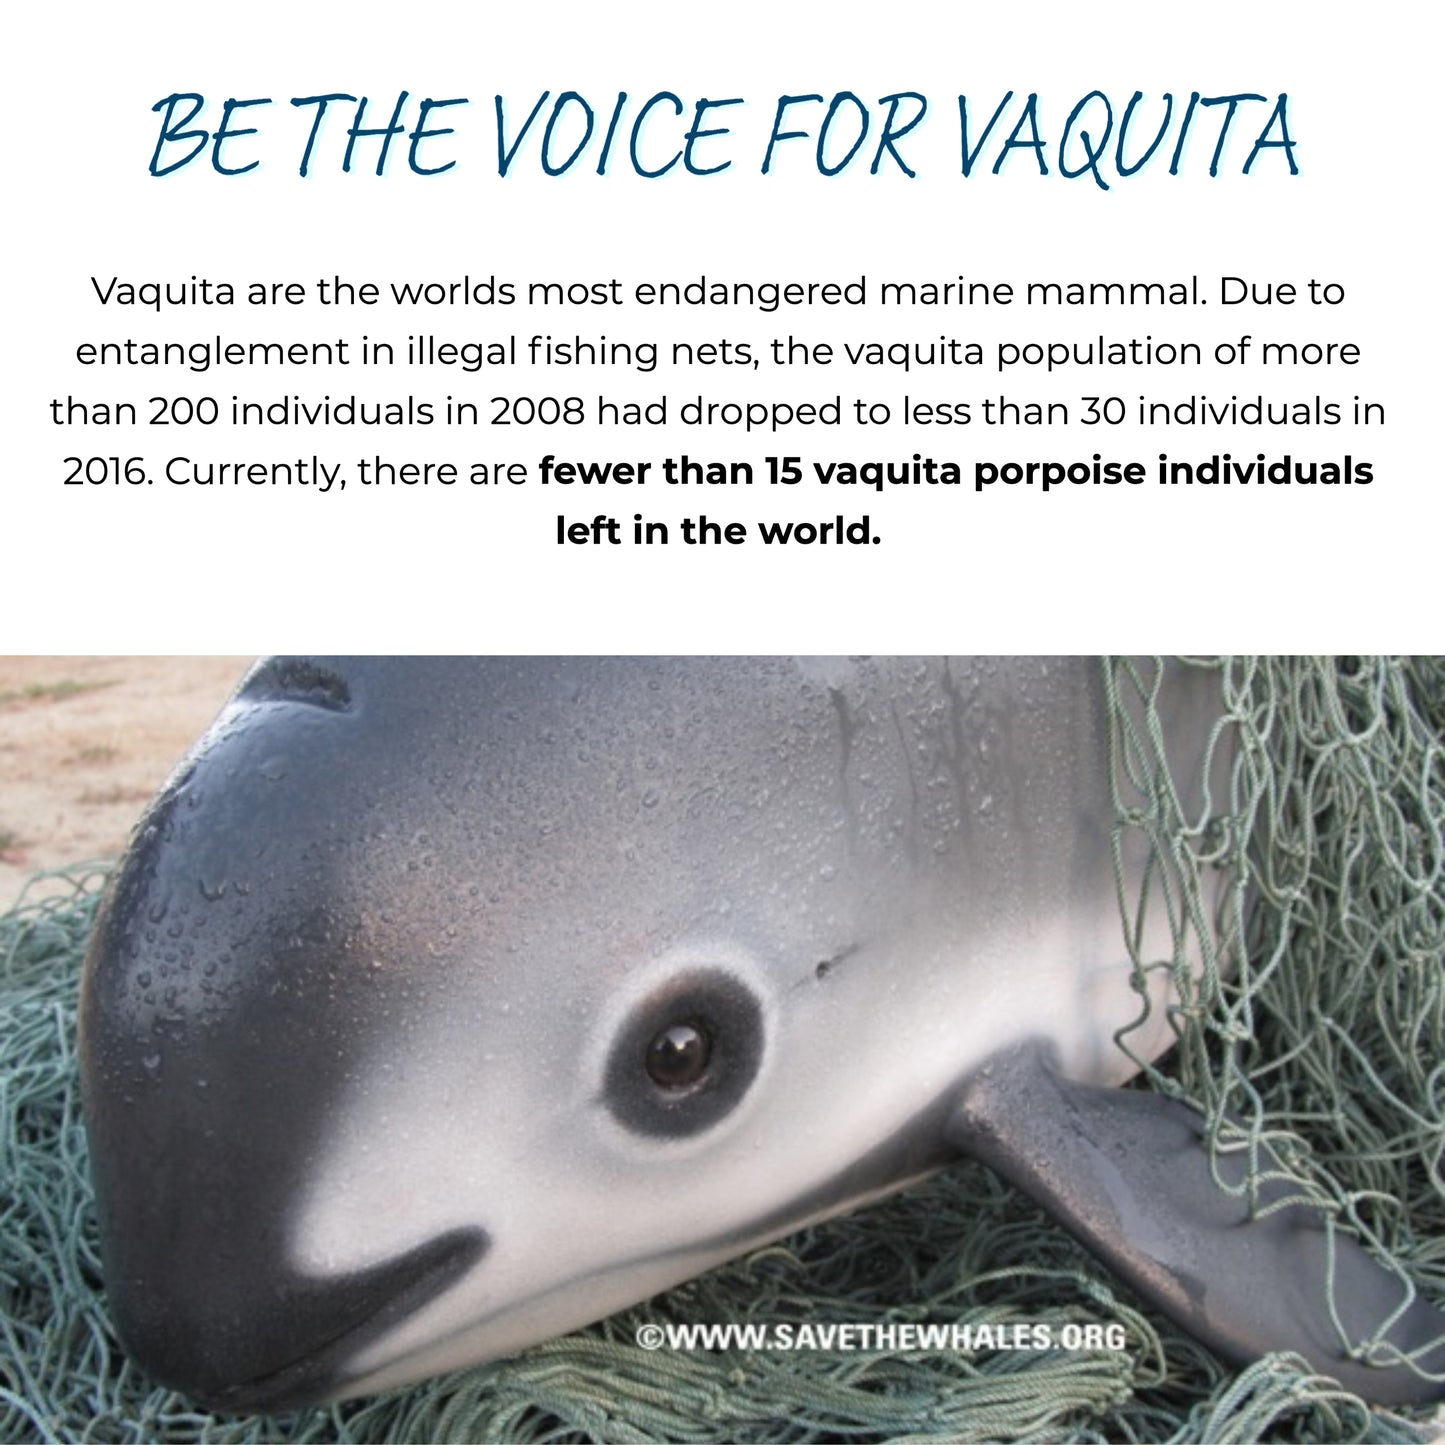 Model Wearing White Save The Vaquita Short-Sleeve Tee - Connected Clothing Company - Ethically & Sustainably Made - 10% of profits donated to vaquita porpoise conservation